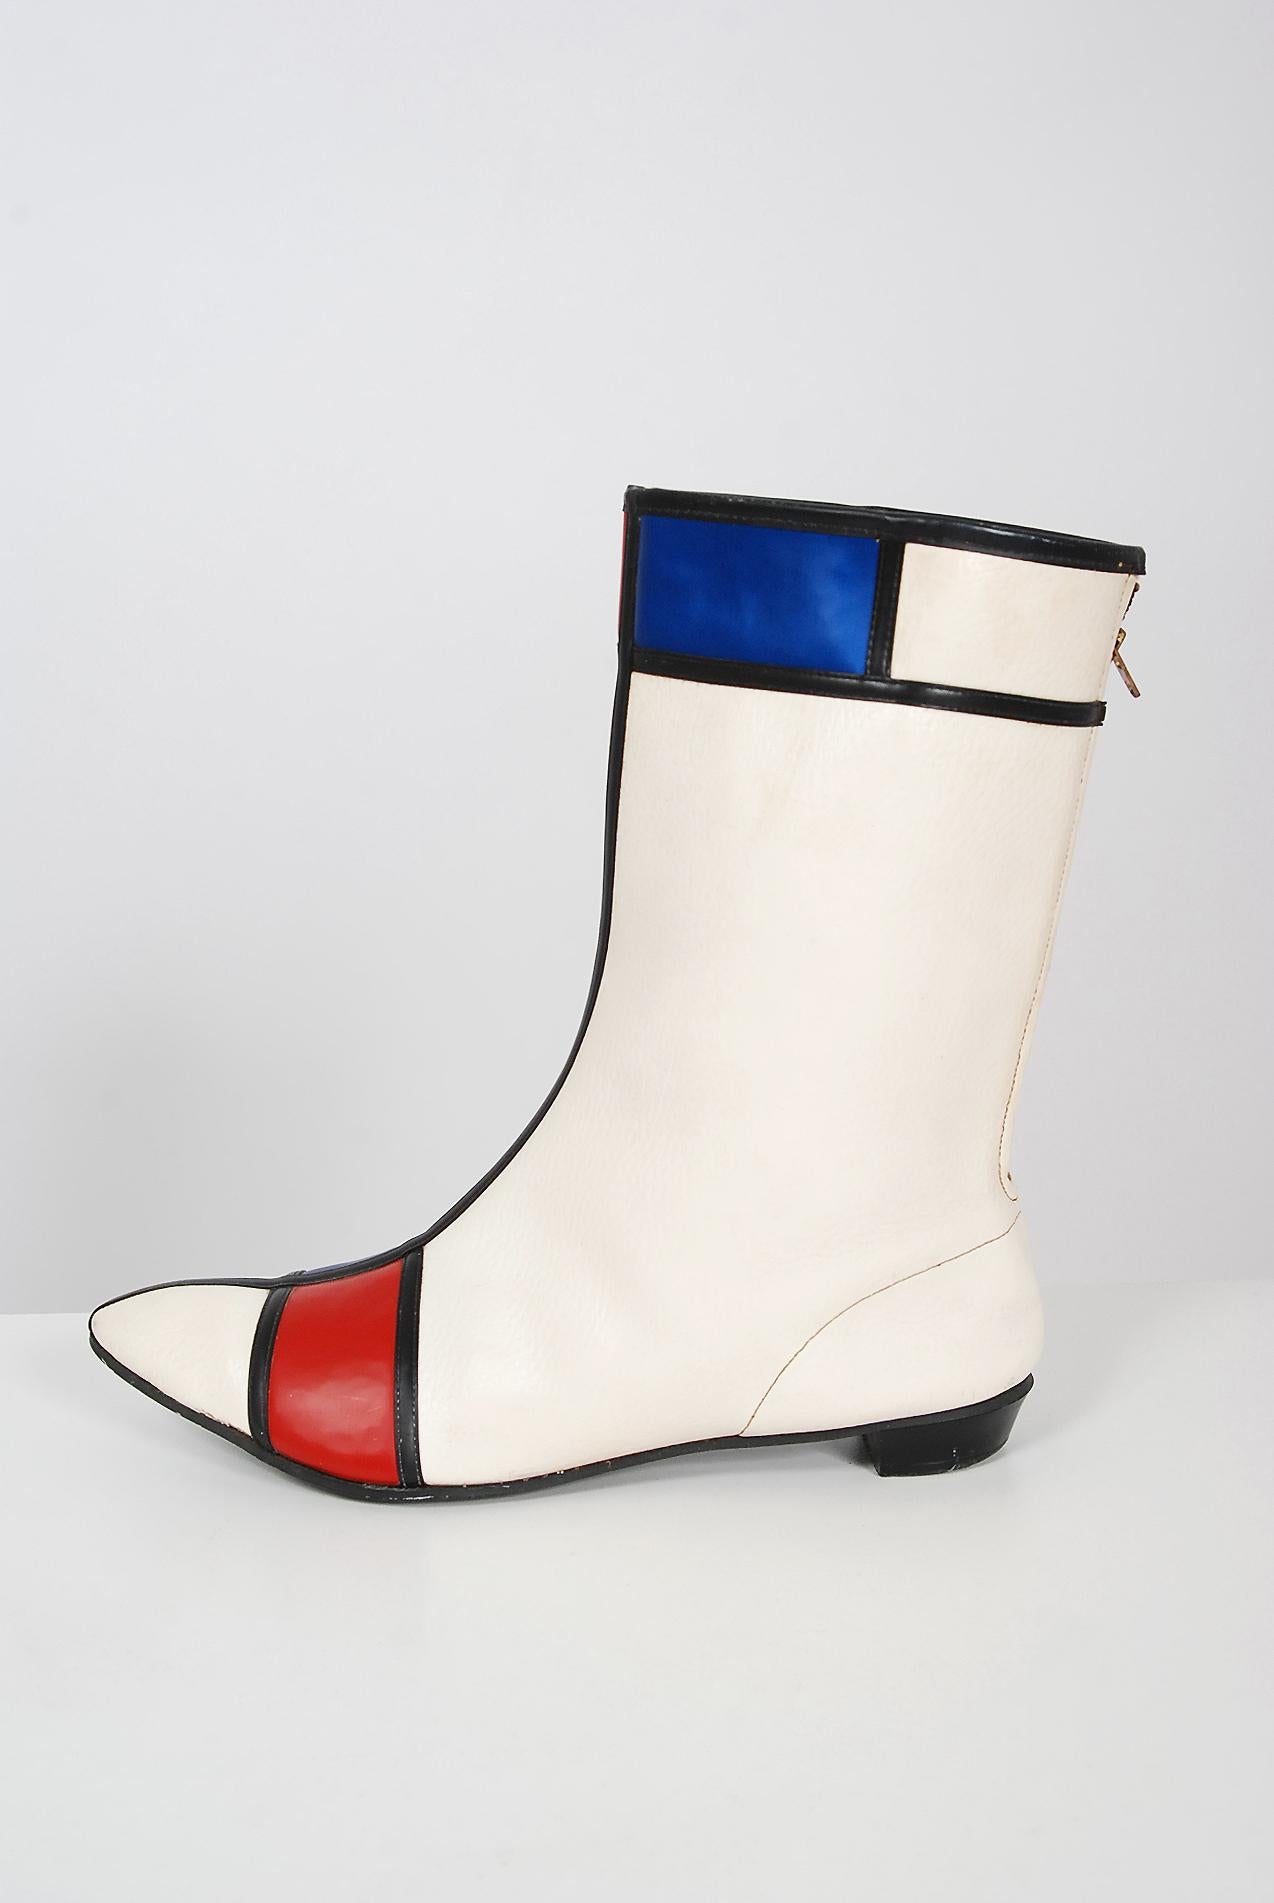 Breathtaking red, white and blue Hi-Brows Mondrian style boots greatly inspired by the Yves Saint Laurent collection of 1965. I love the unique block-color design and chic mid-calf length. The bold, brass zippers work perfectly. Mod boots that are